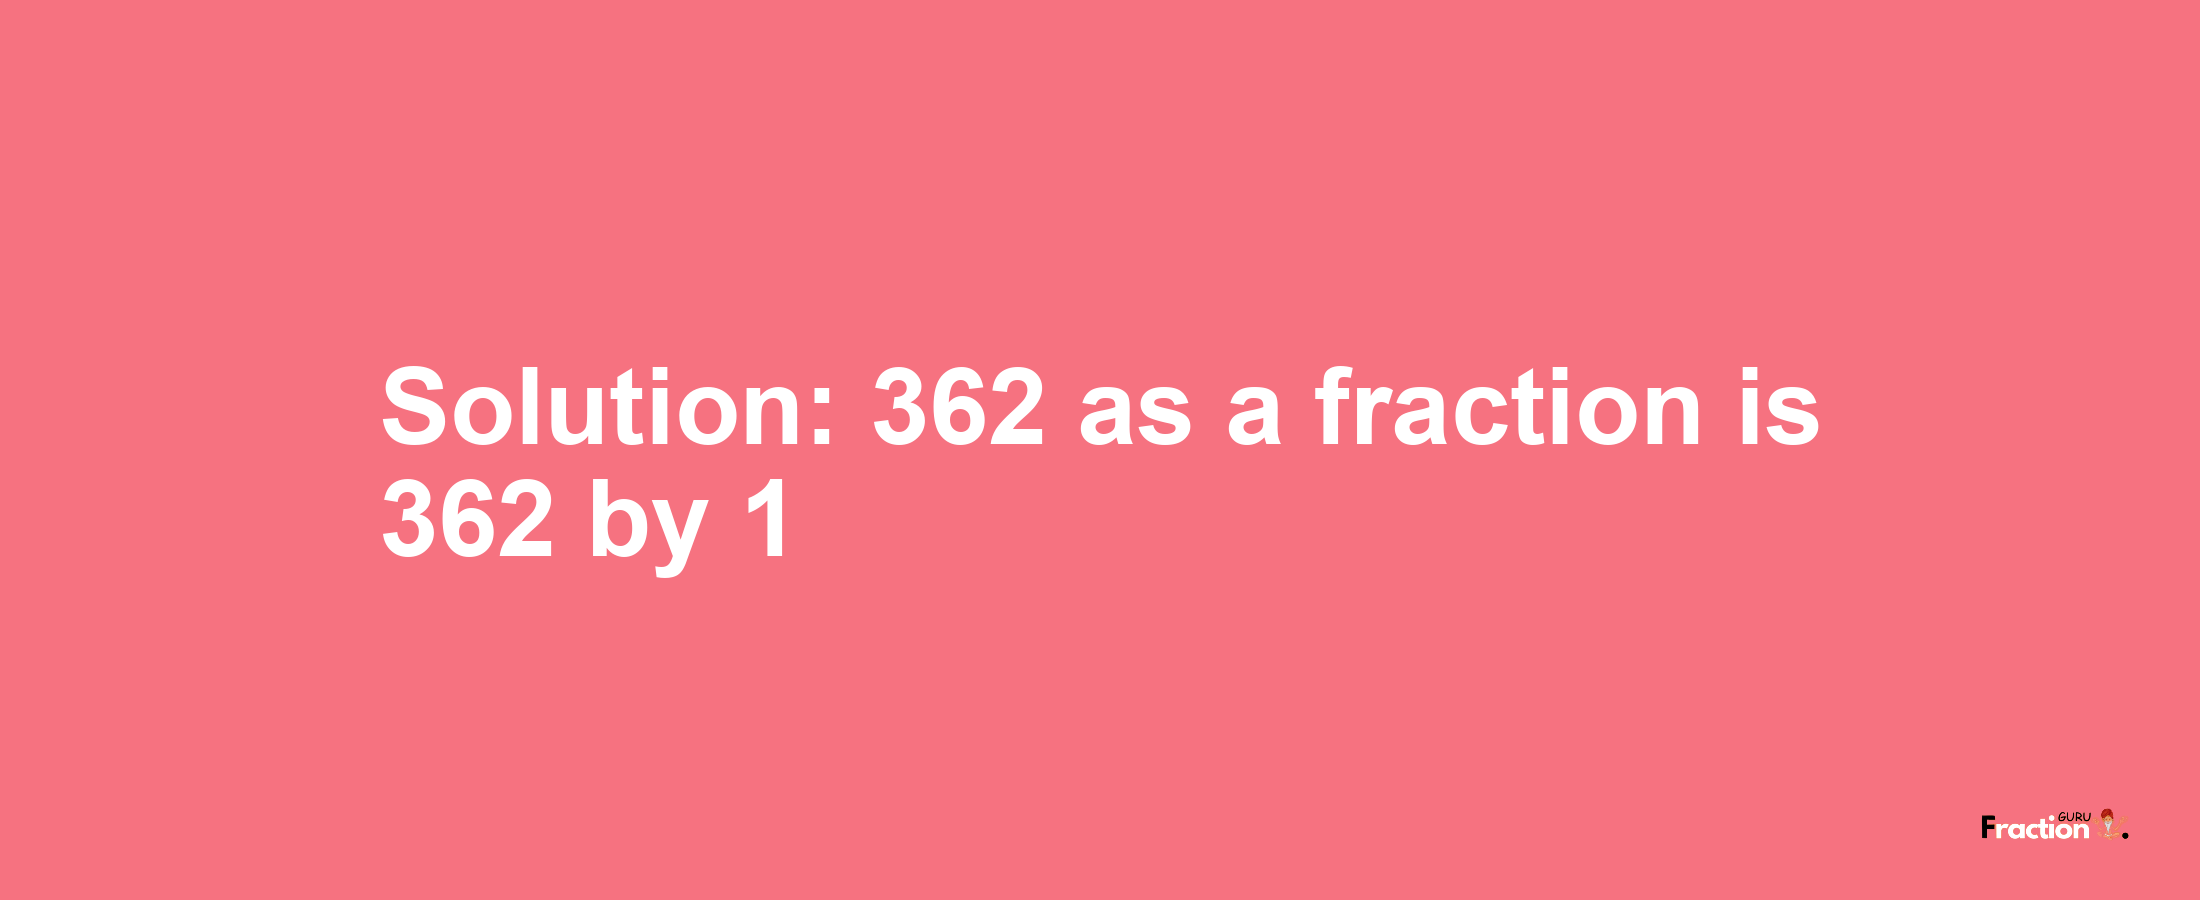 Solution:362 as a fraction is 362/1